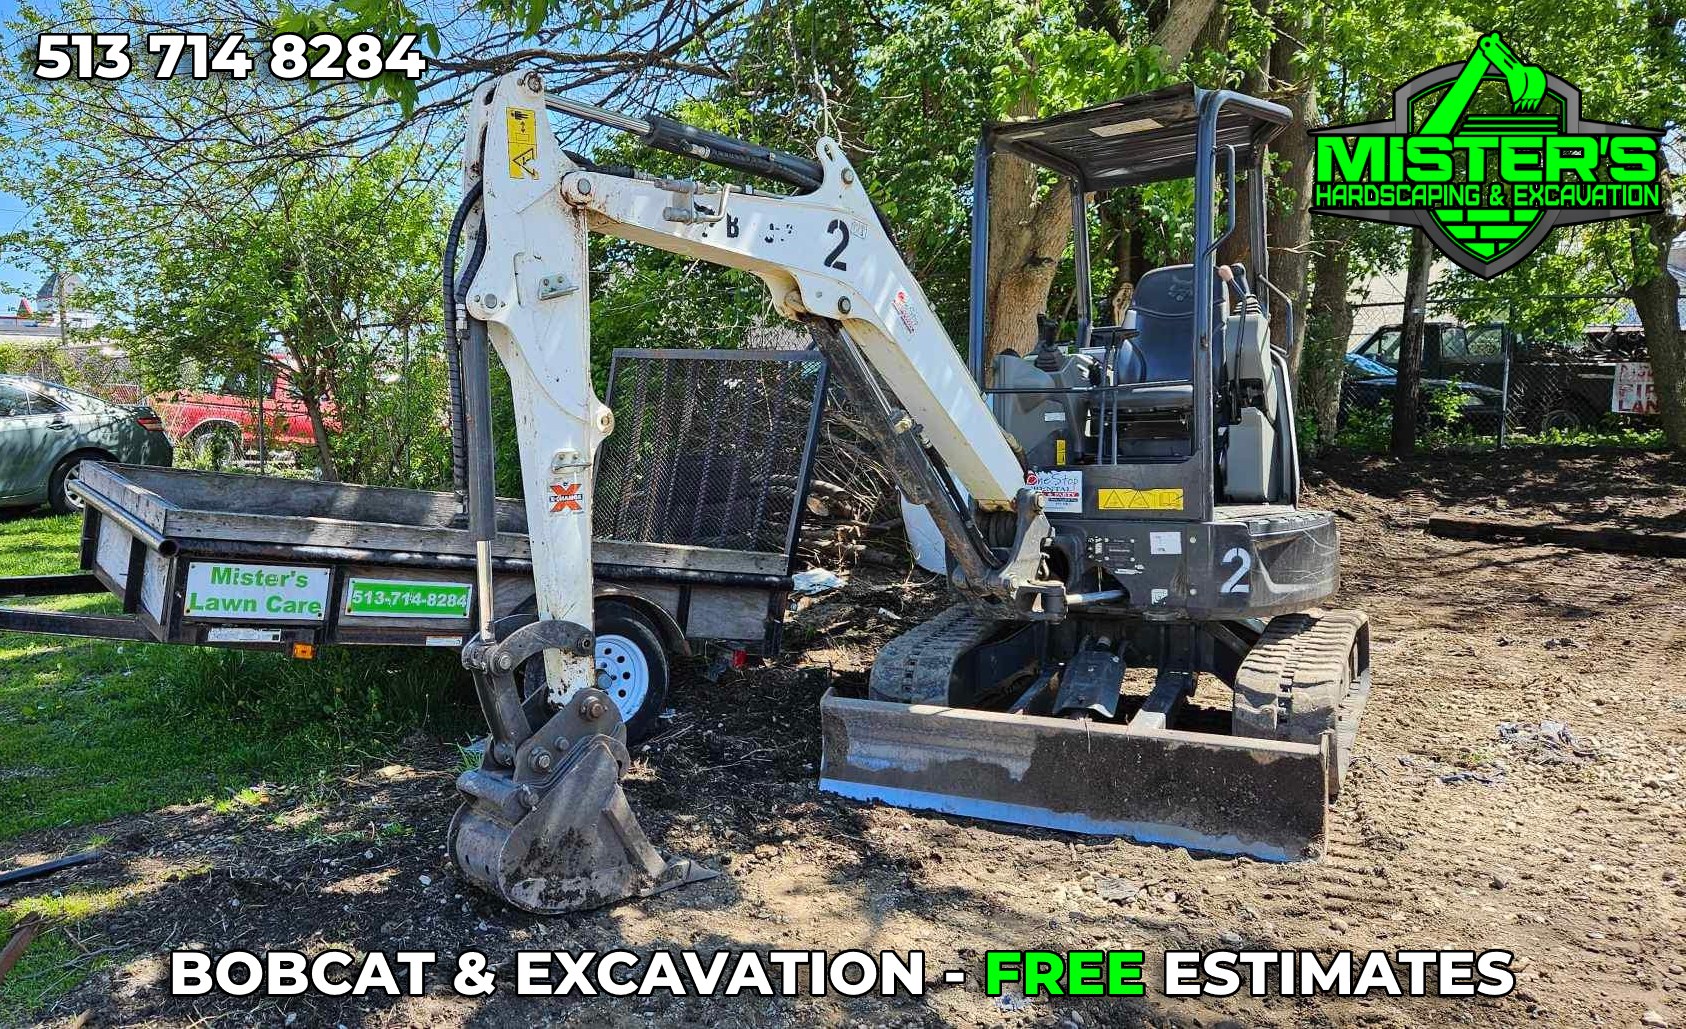 Bobcat Excavation and Landscaping Equipment from Mister's Landscaping and Excavation in Hamilton, Ohio - Free Estimates Available